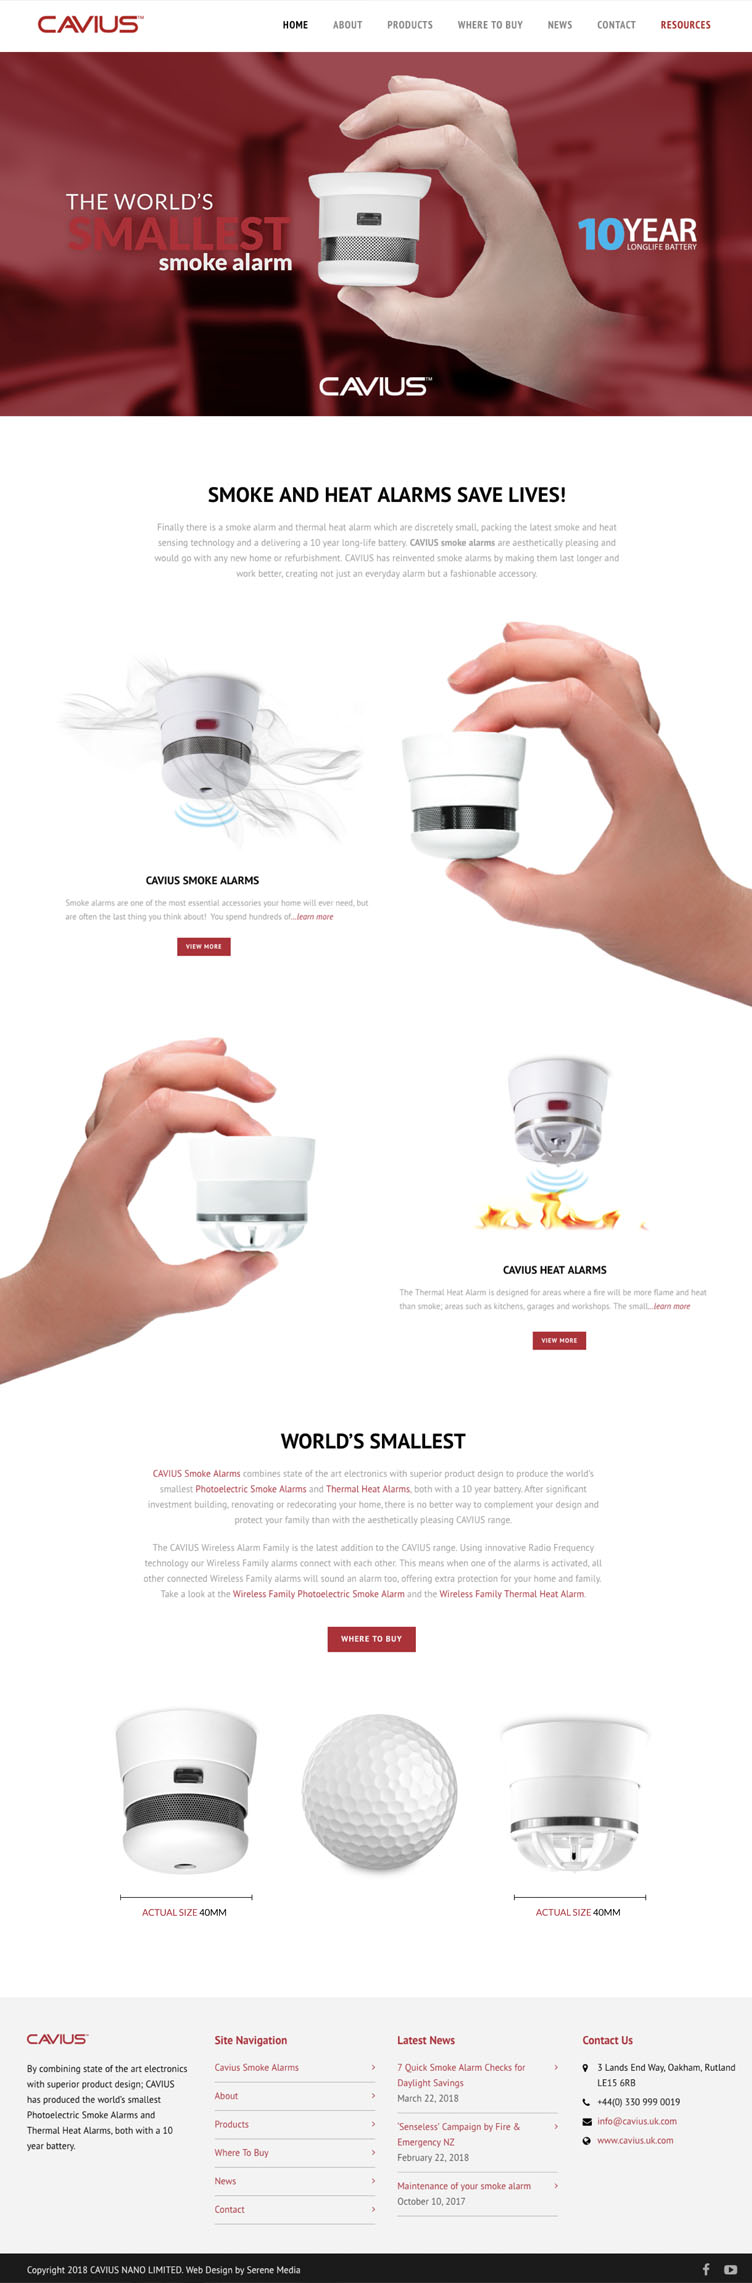 A full mock-up of a web design by DCI Digital for Cavius smoke alarms